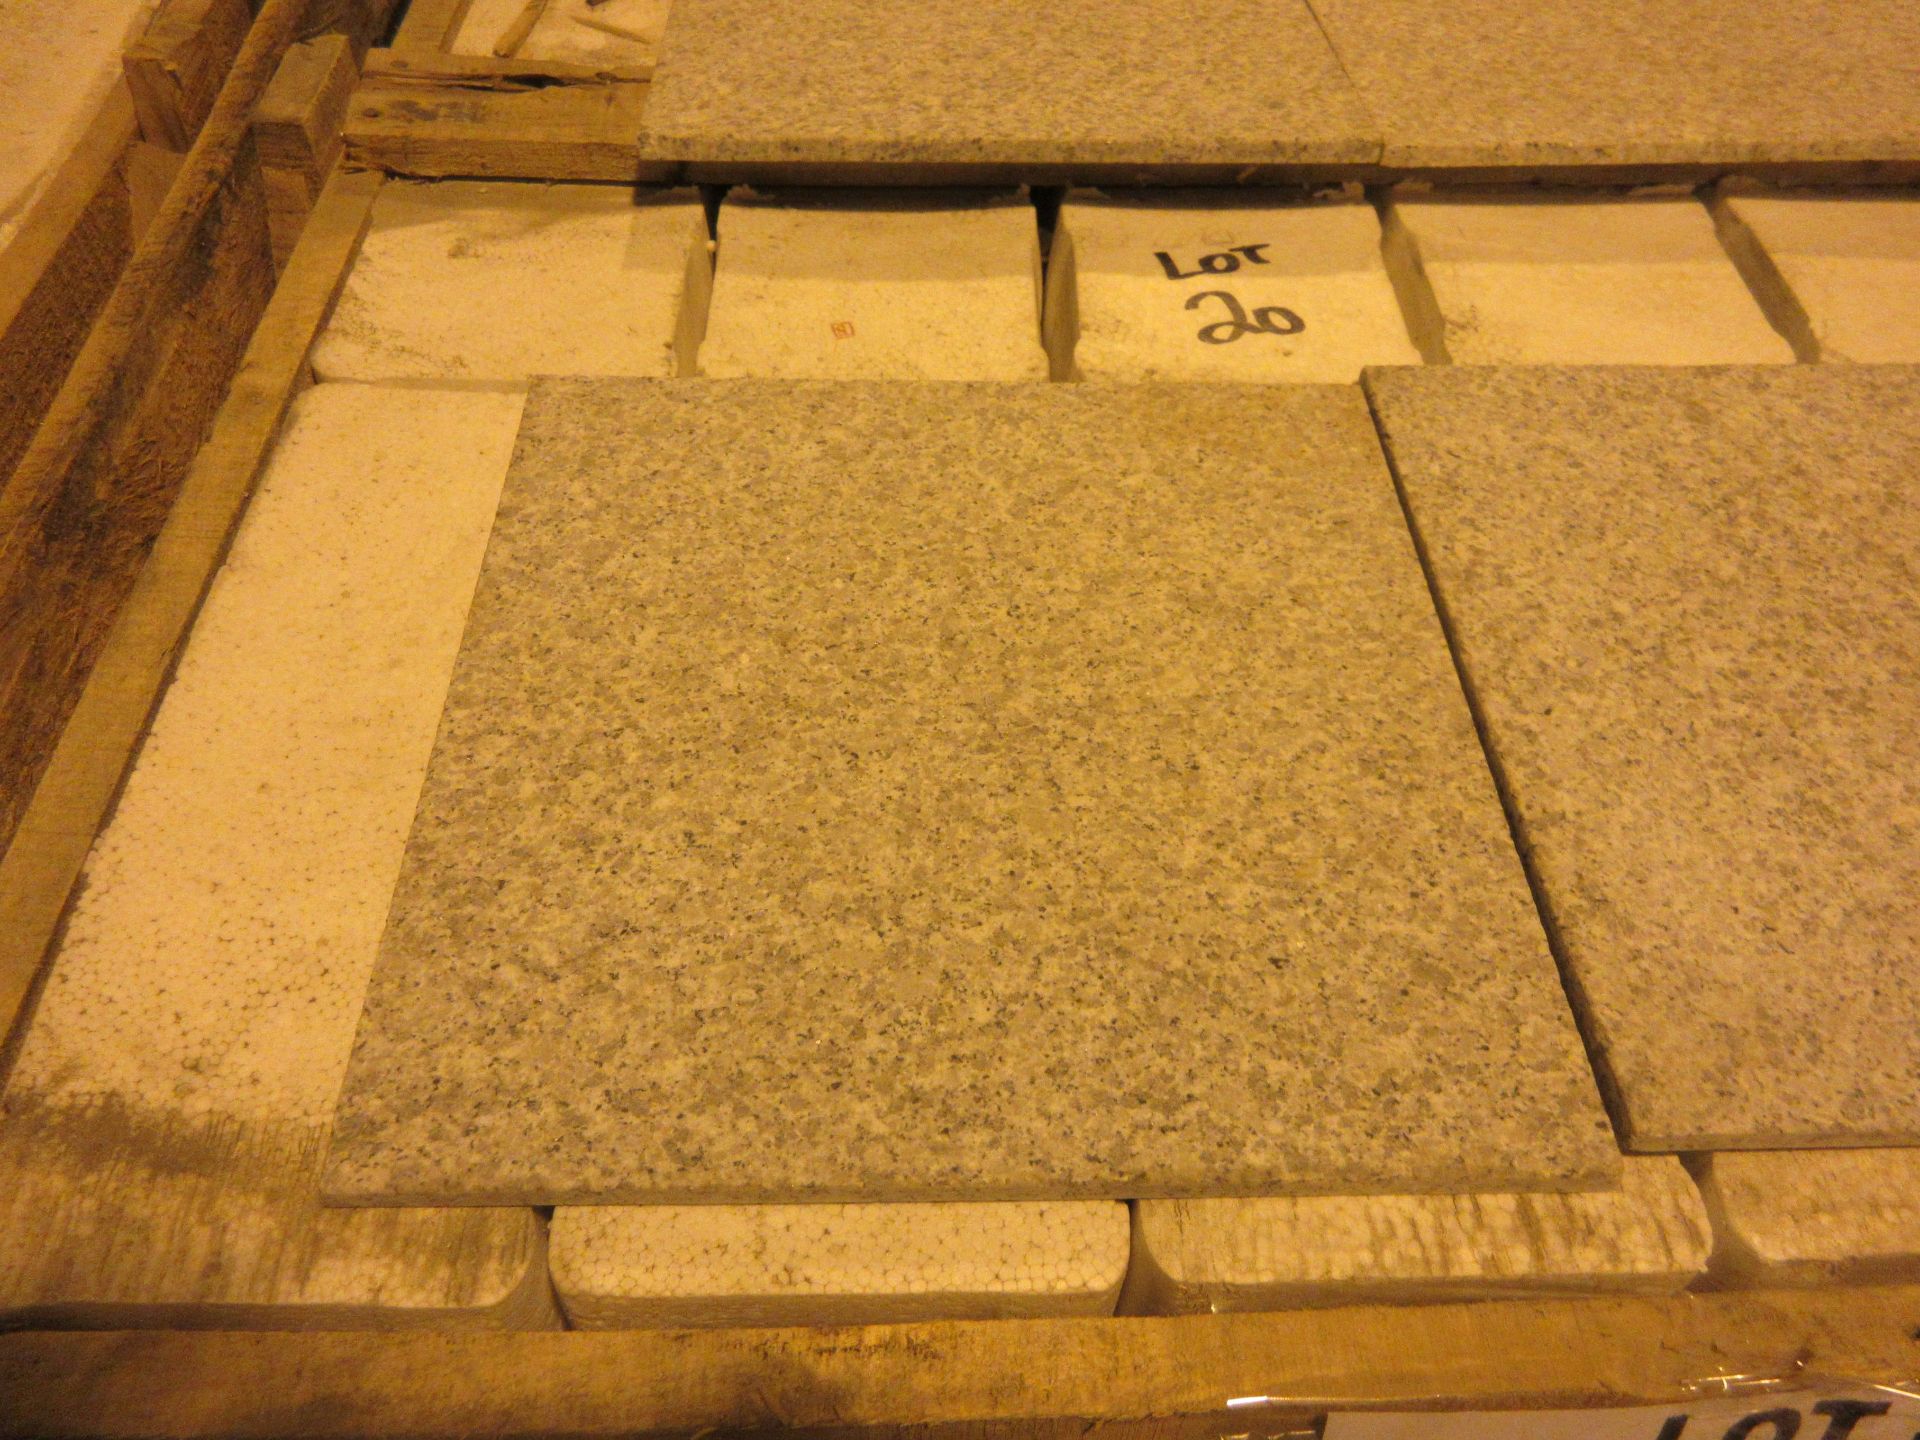 LOT 360 pieces - Gray torched granite 12"x 12"x 3/8"